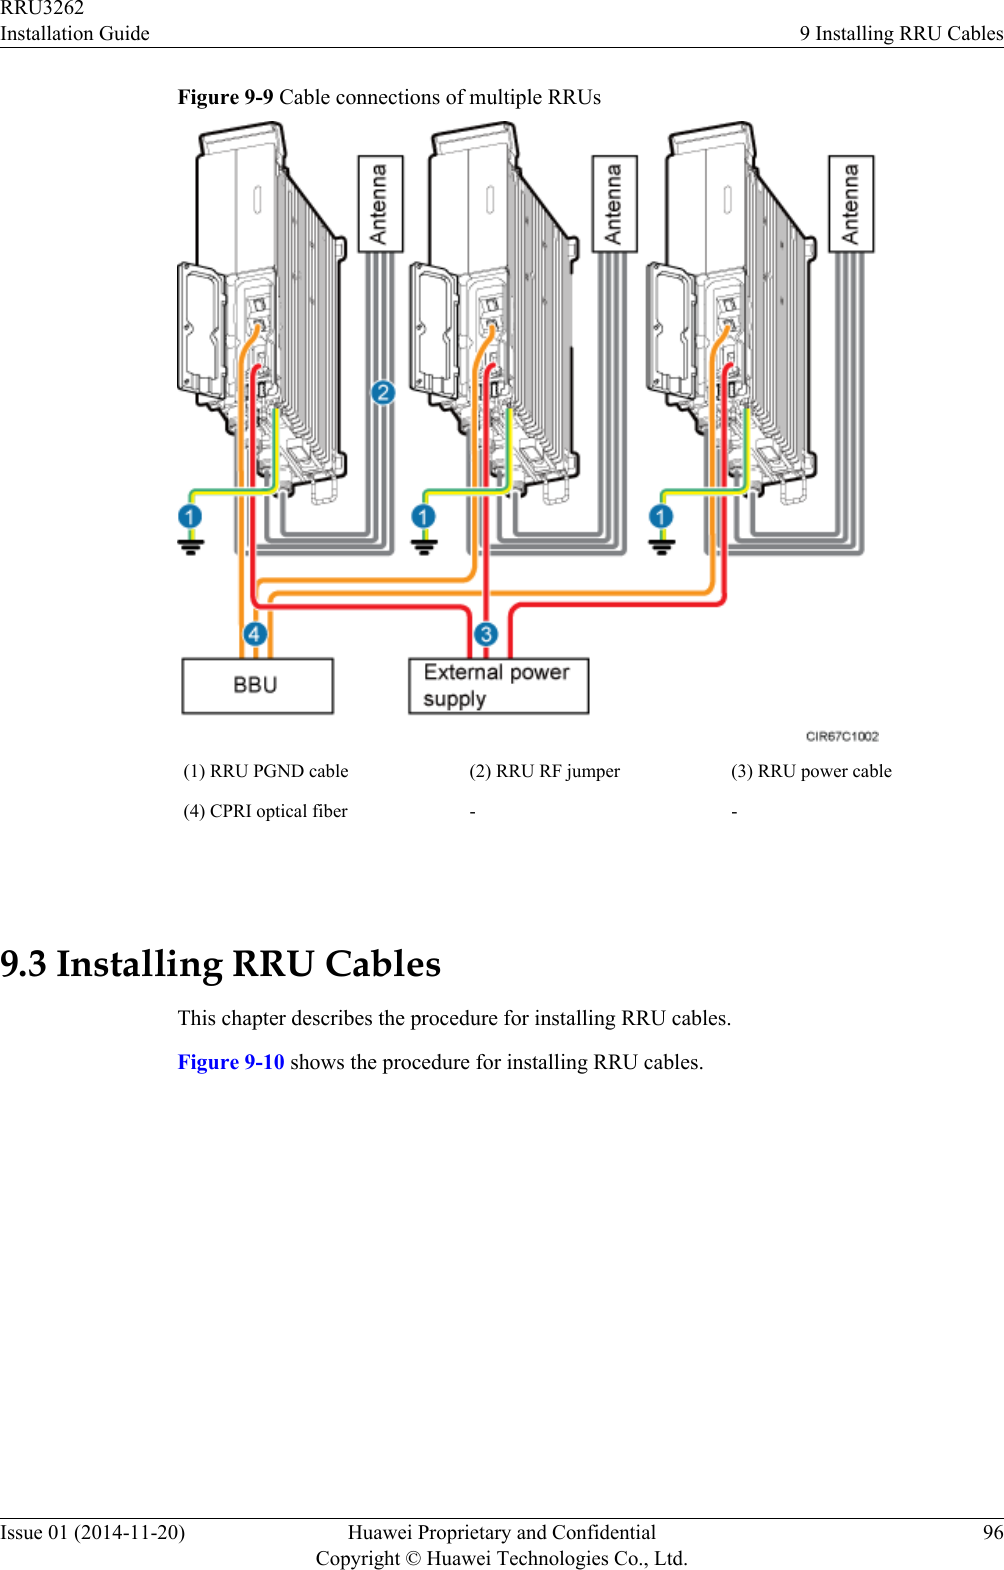 Figure 9-9 Cable connections of multiple RRUs(1) RRU PGND cable (2) RRU RF jumper (3) RRU power cable(4) CPRI optical fiber - - 9.3 Installing RRU CablesThis chapter describes the procedure for installing RRU cables.Figure 9-10 shows the procedure for installing RRU cables.RRU3262Installation Guide 9 Installing RRU CablesIssue 01 (2014-11-20) Huawei Proprietary and ConfidentialCopyright © Huawei Technologies Co., Ltd.96